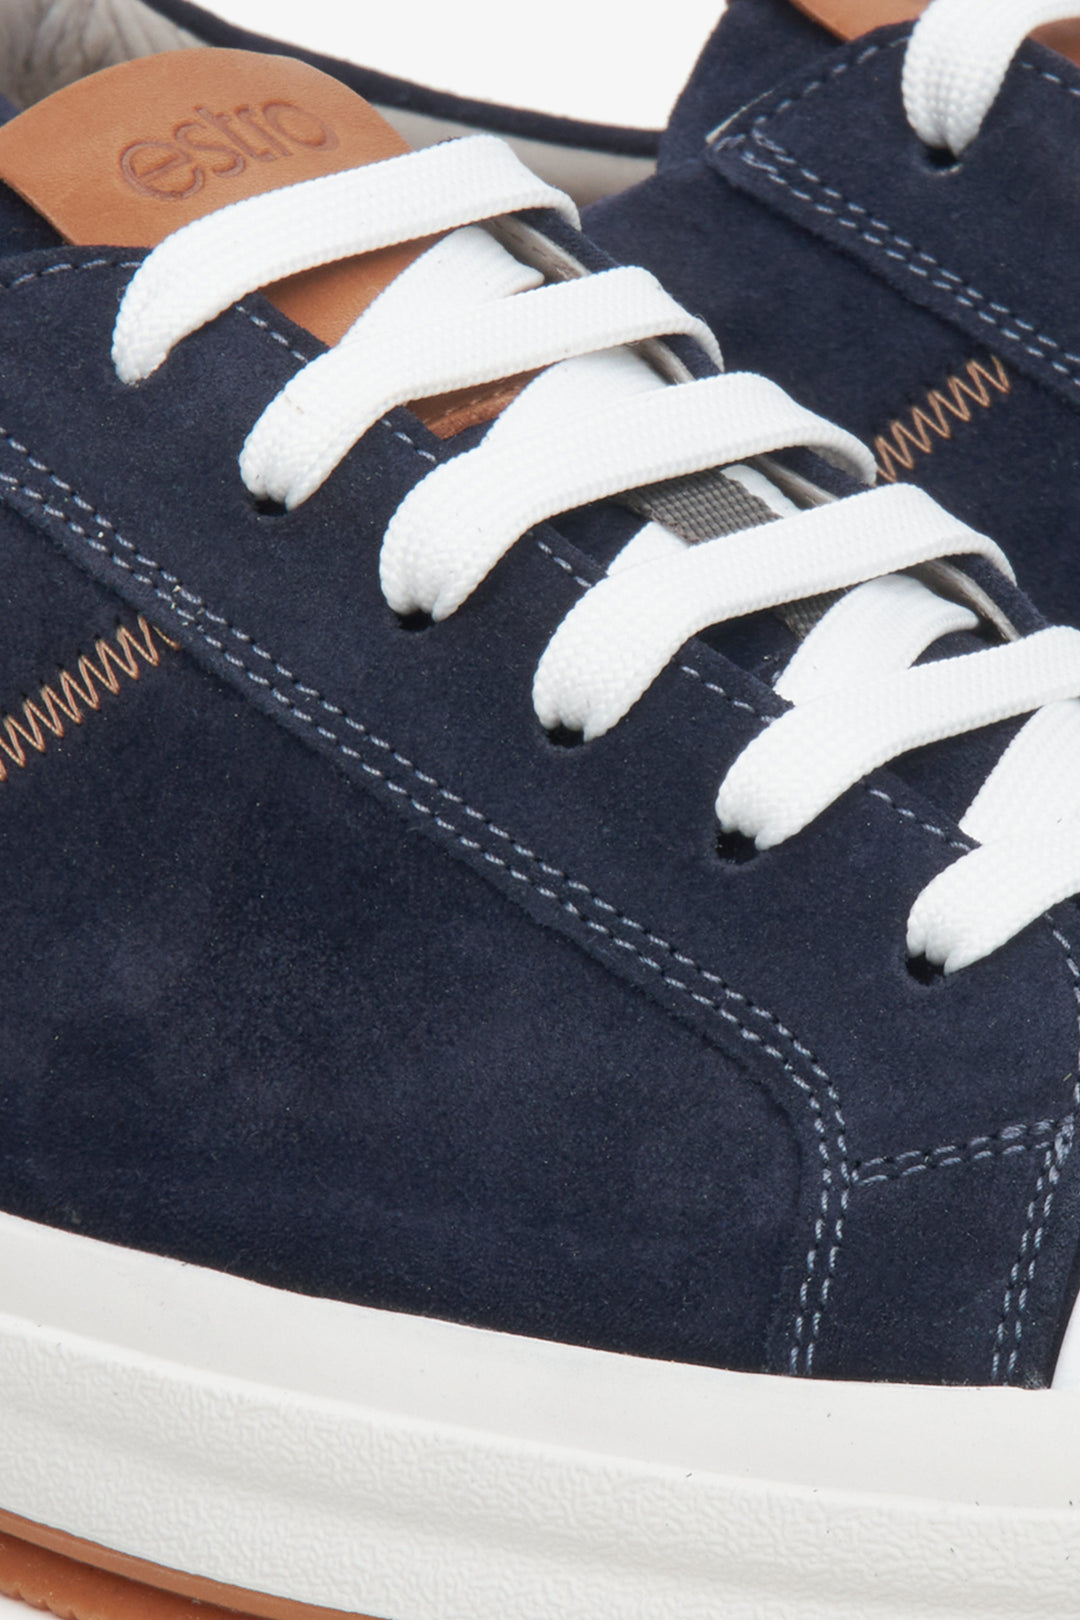 Estro navy blue men's sneakers made of genuine velour - close-up on details.